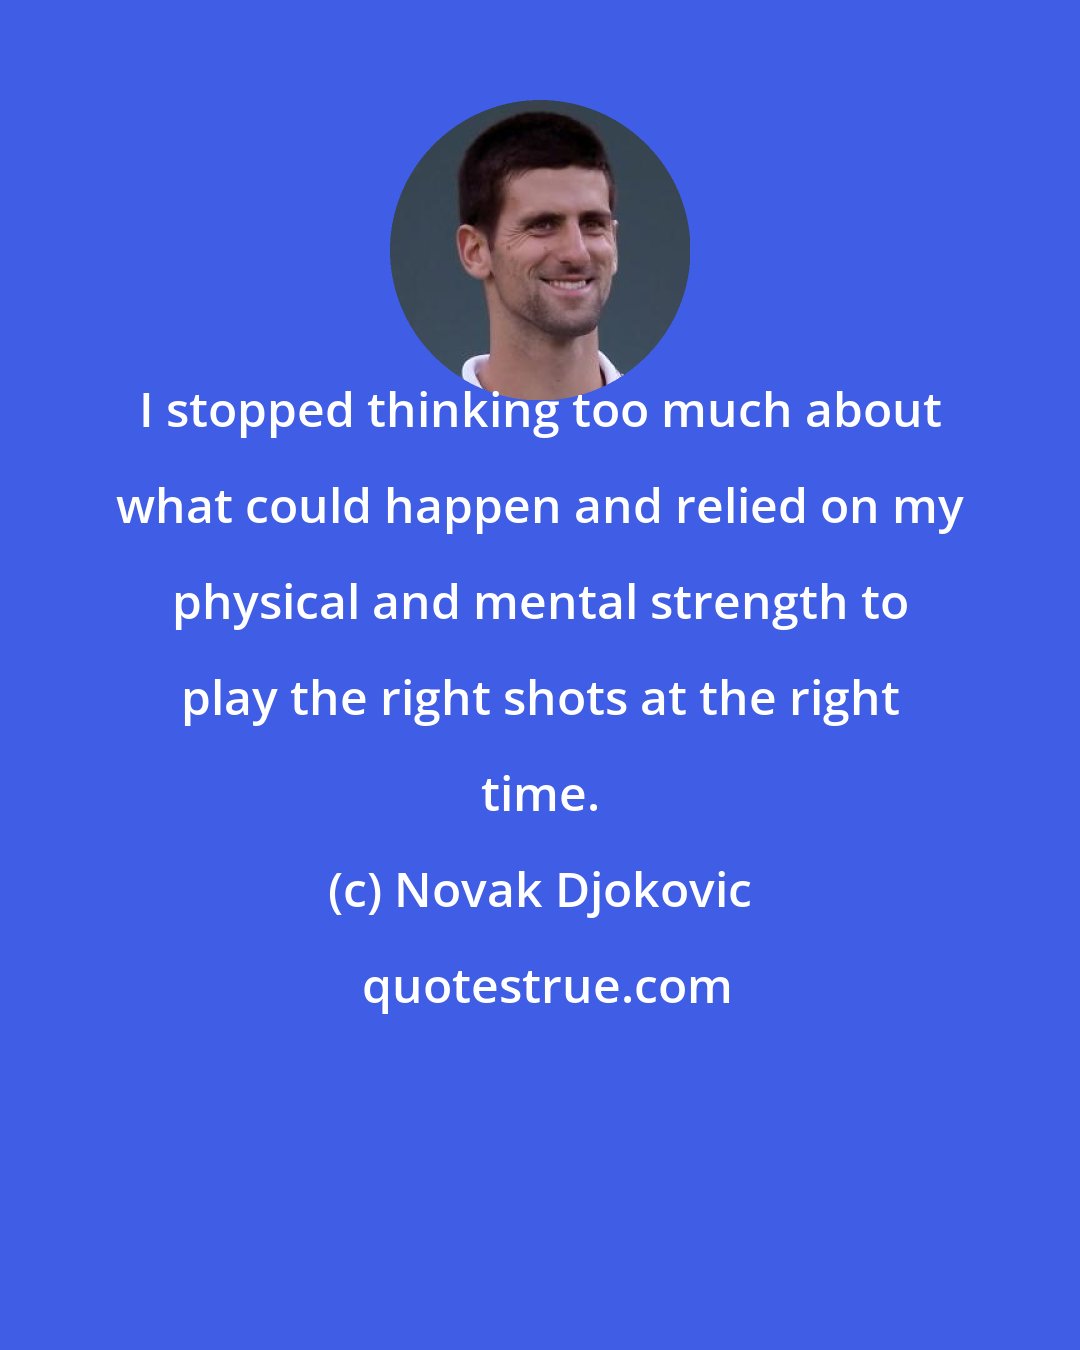 Novak Djokovic: I stopped thinking too much about what could happen and relied on my physical and mental strength to play the right shots at the right time.